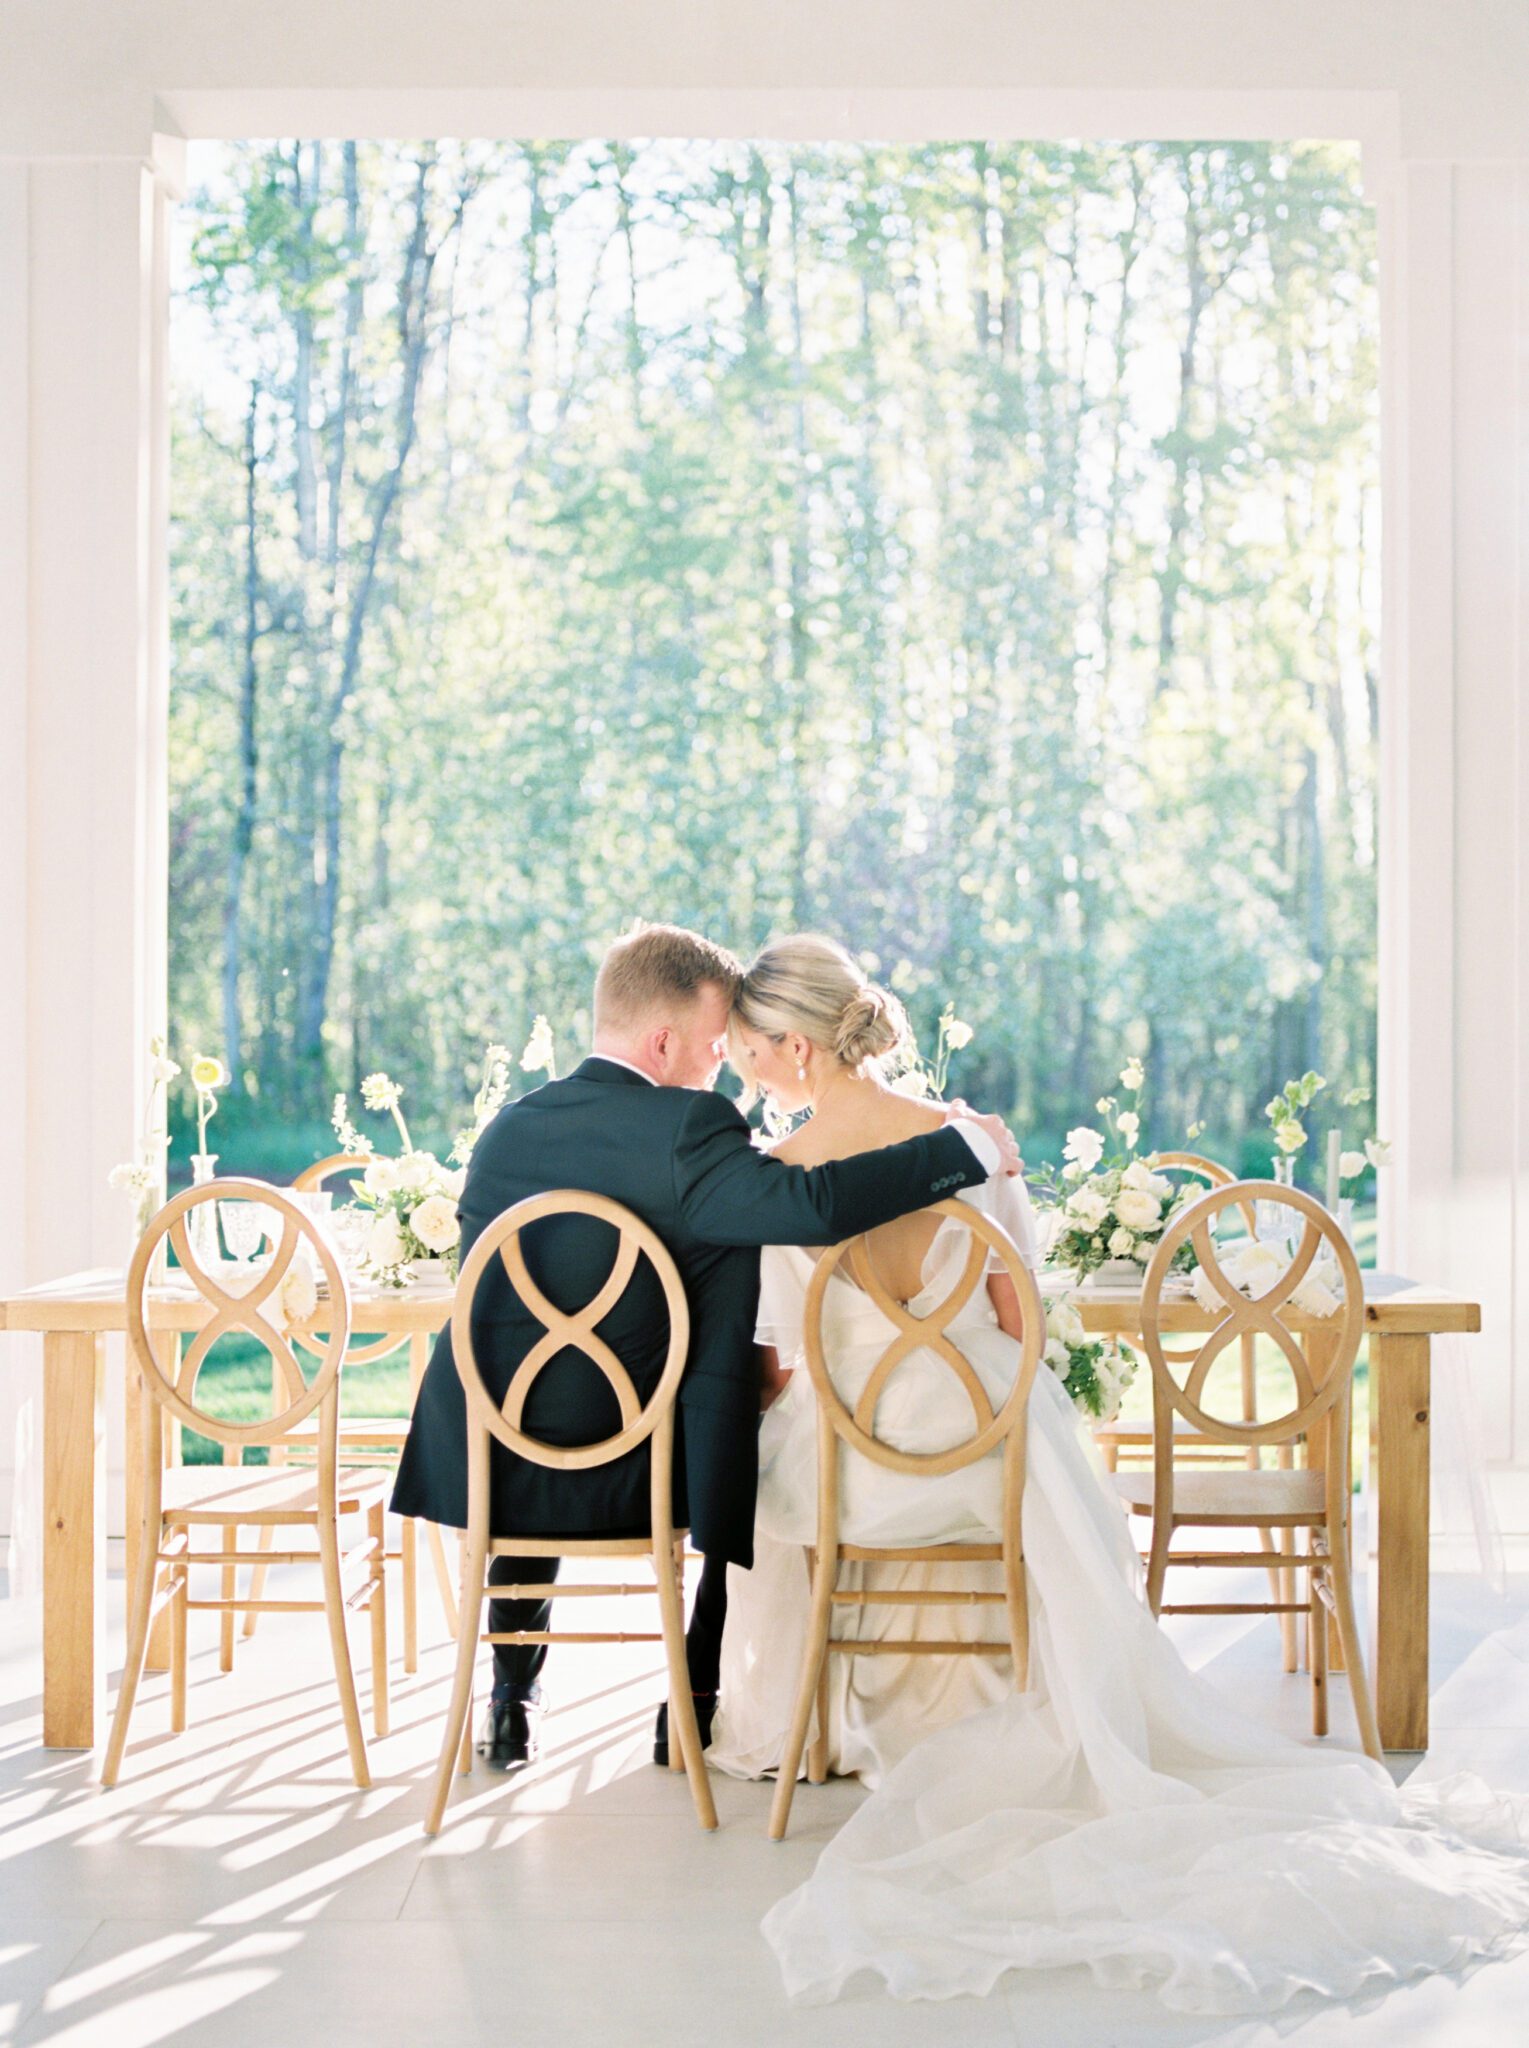 Couple sitting at cottage core inspired wedding reception at Sparrow Lane Weddings and Events venue near Edmonton, Alberta. Fine art summer wedding. Wooden infinity chairs, outdoor summer wedding tablescape with lush florals in pale yellow, ivory and white with greenery. 